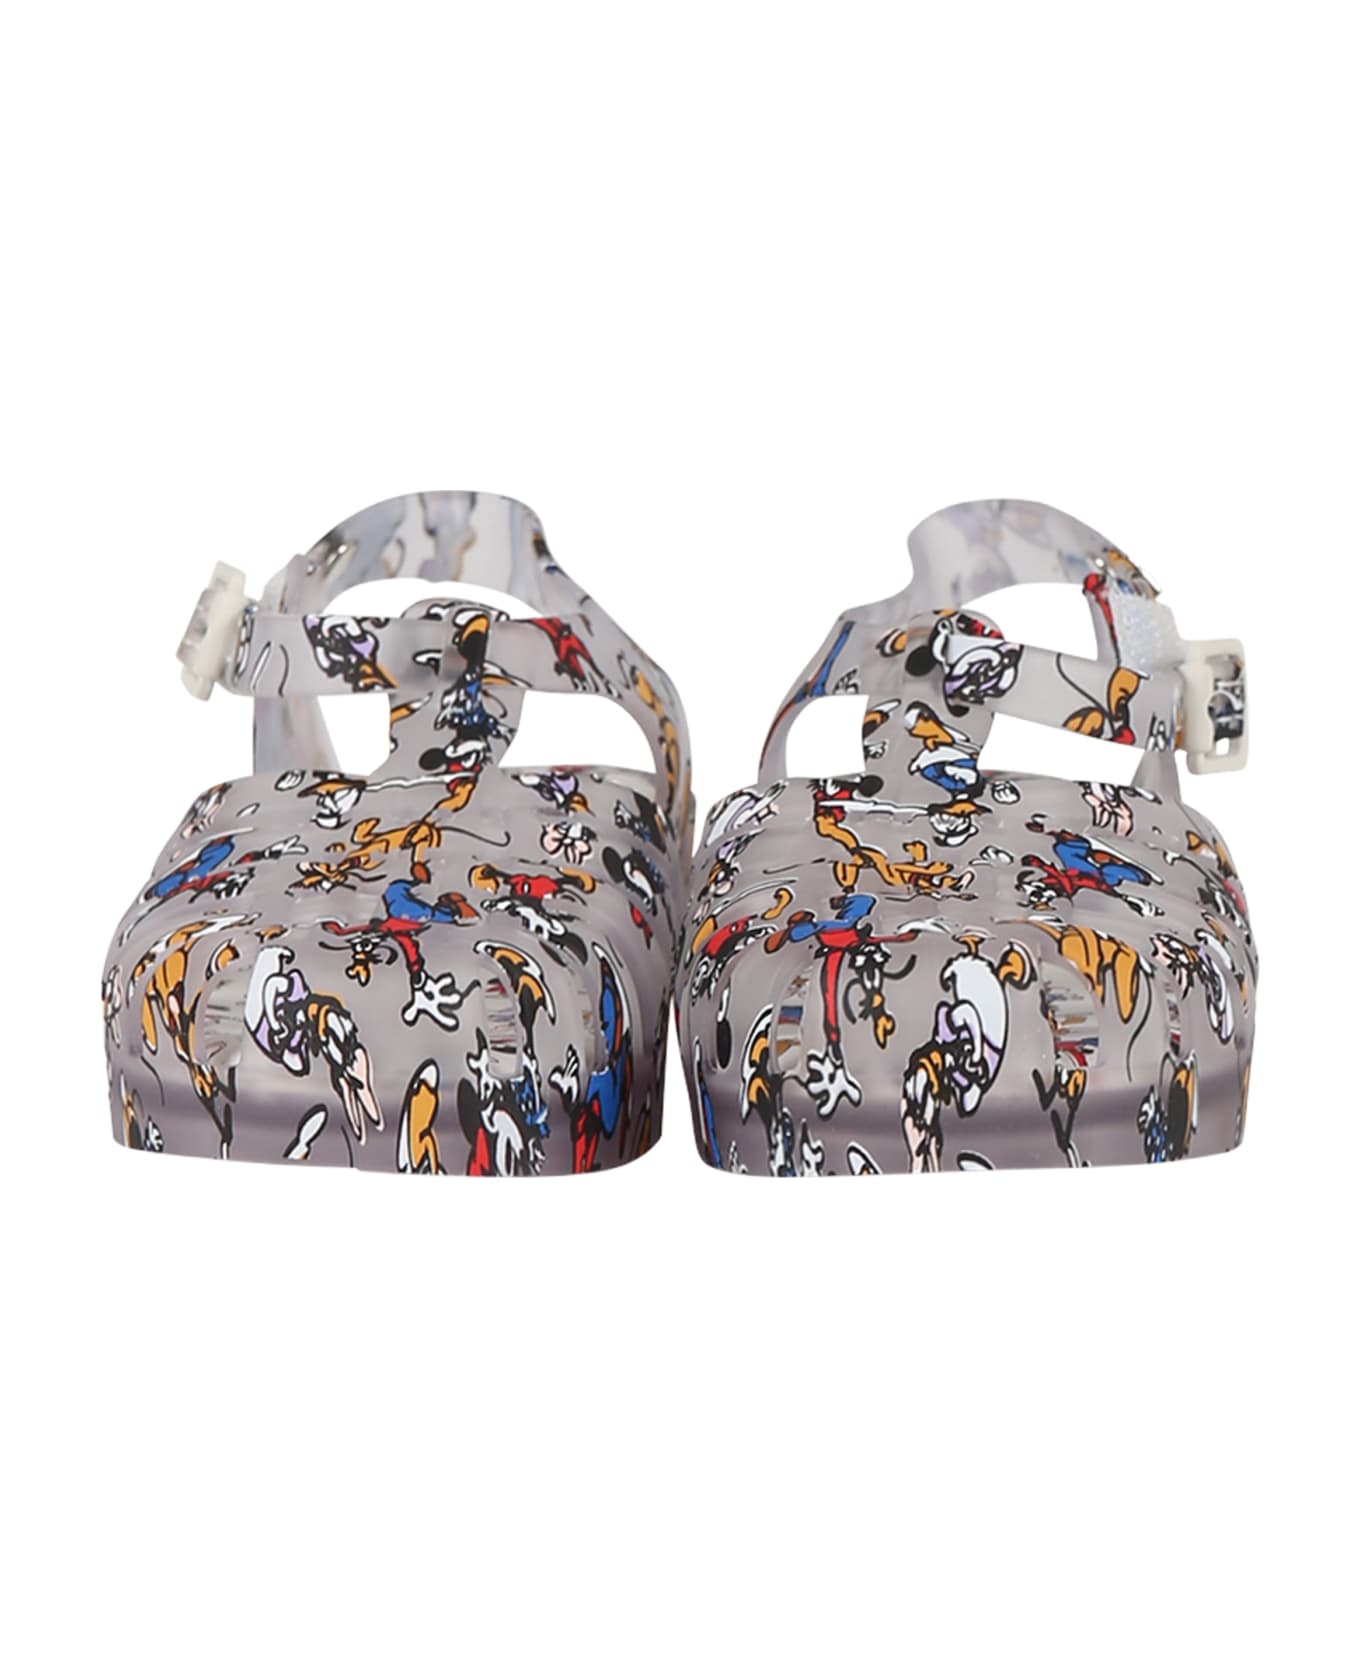 Melissa Multicolor Sandals For Boy With Disney Characters - Multicolor シューズ